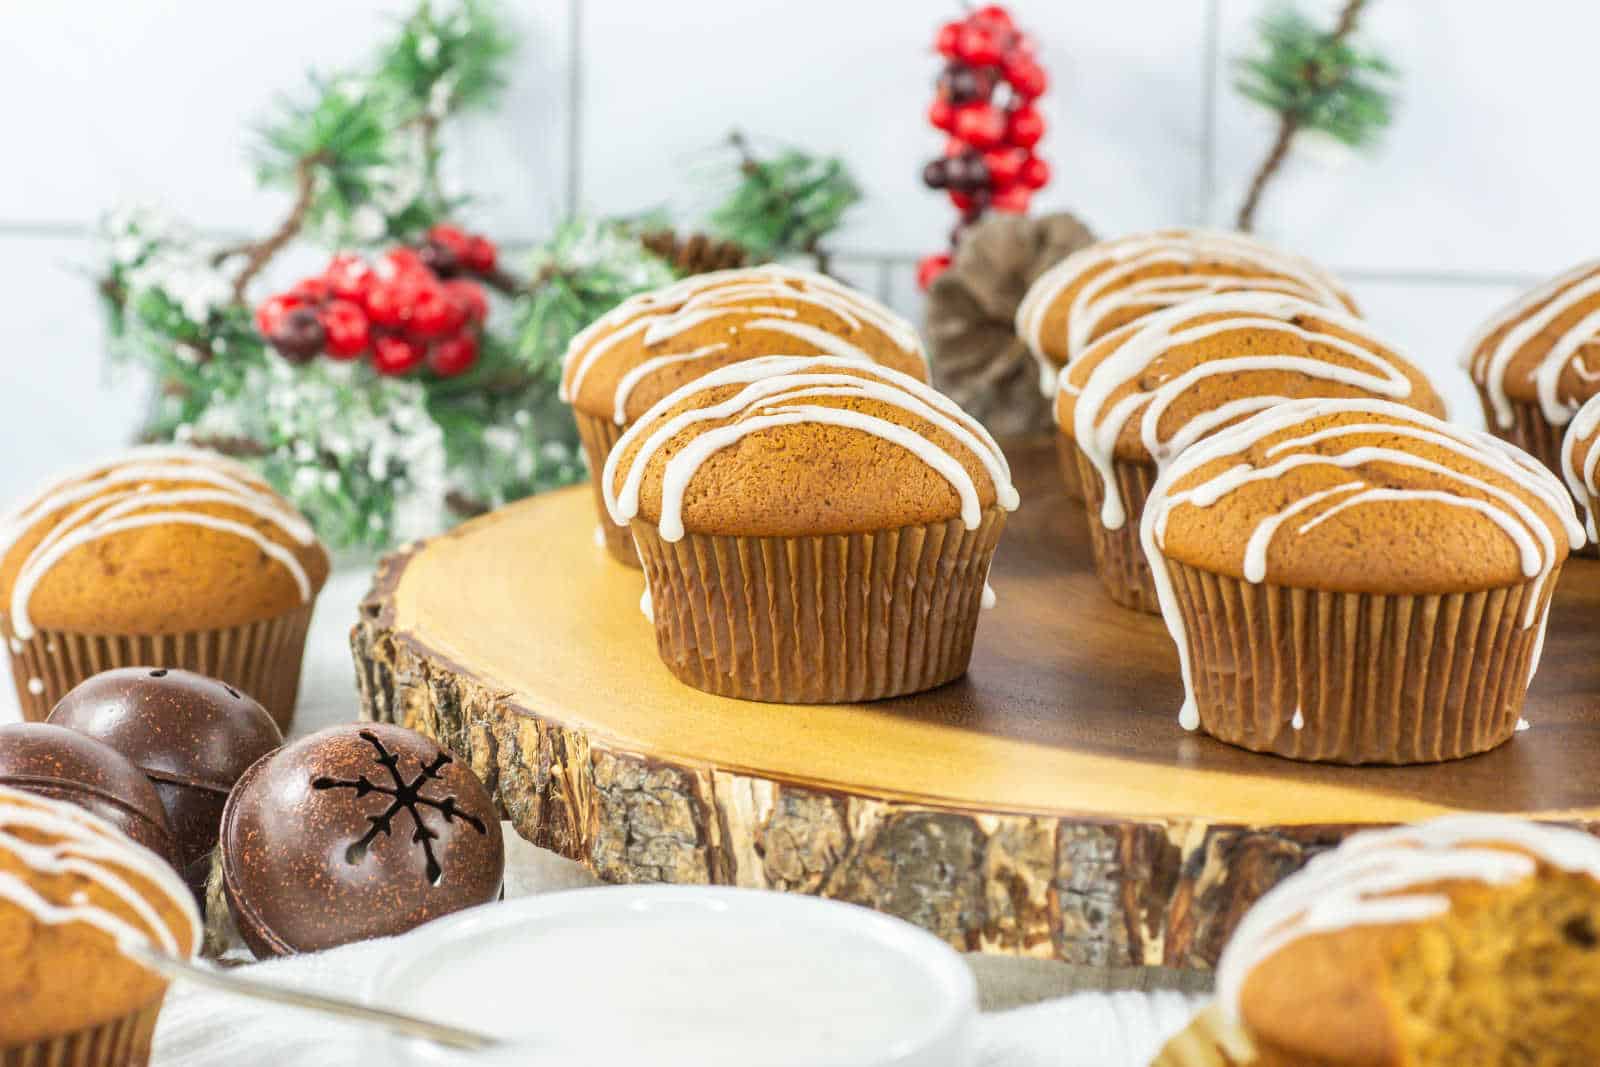 Gingerbread muffins with icing on a wooden board.